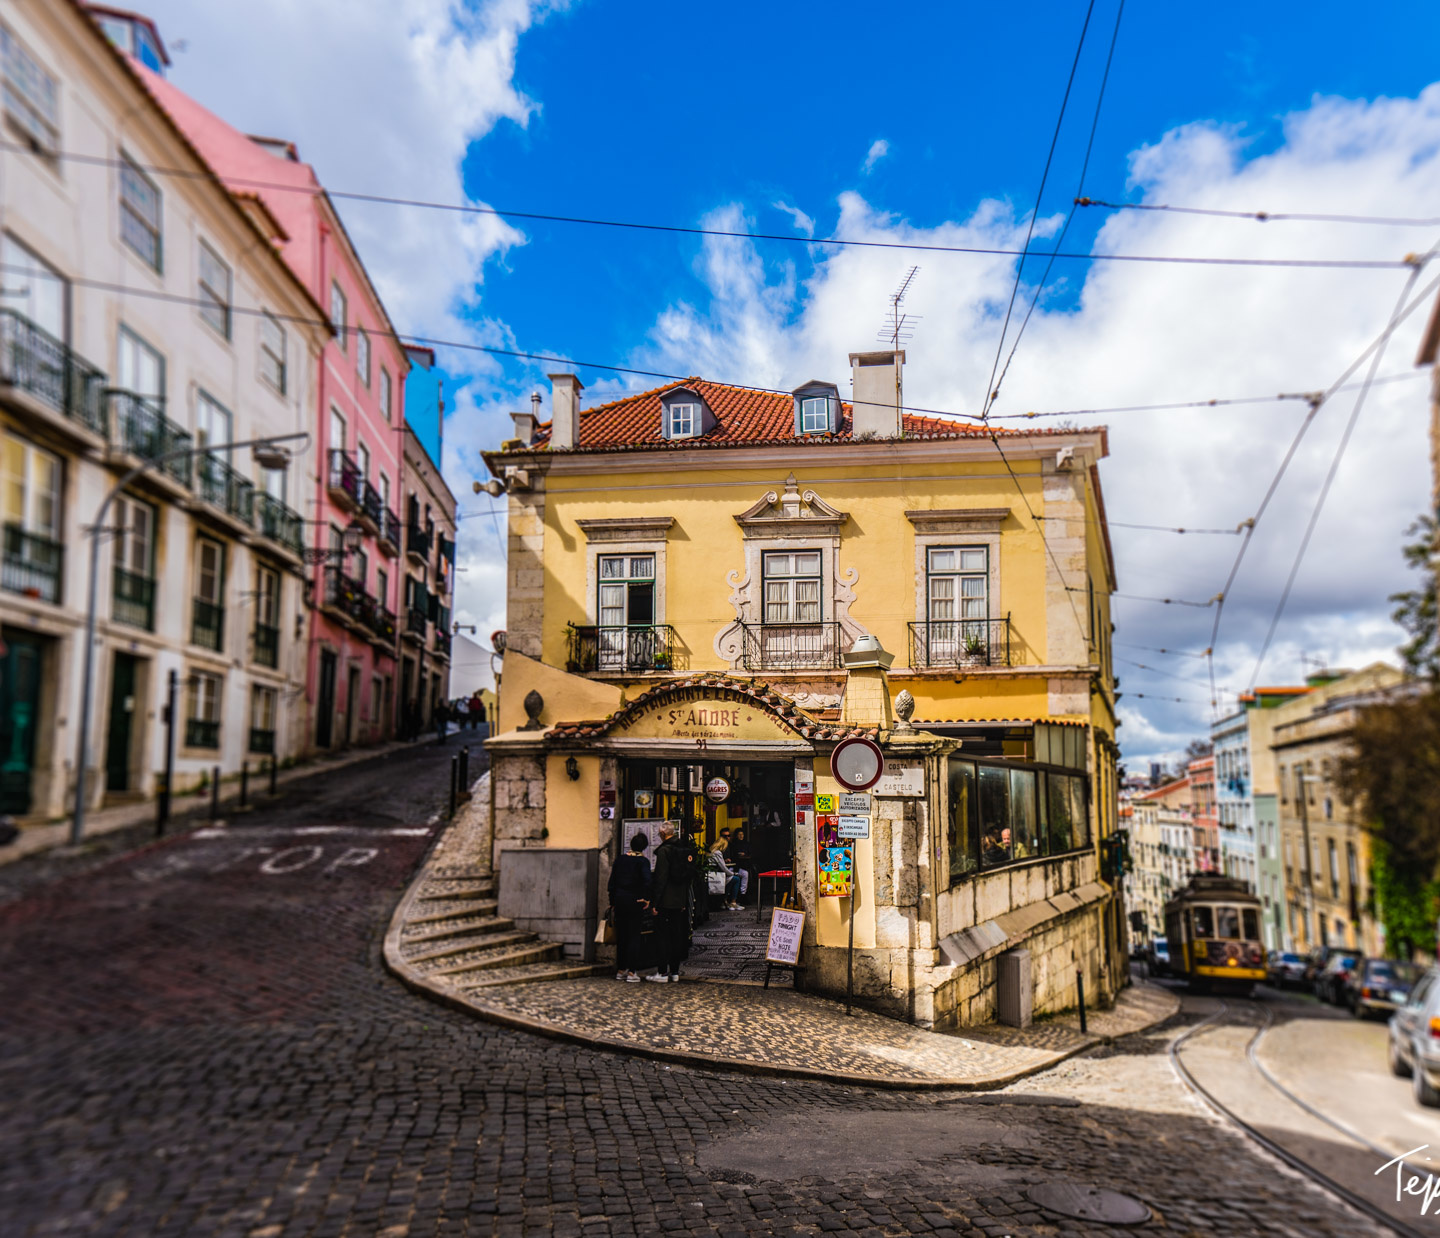 Why Lisbon Should be at the Top of Your Travel Bucket List